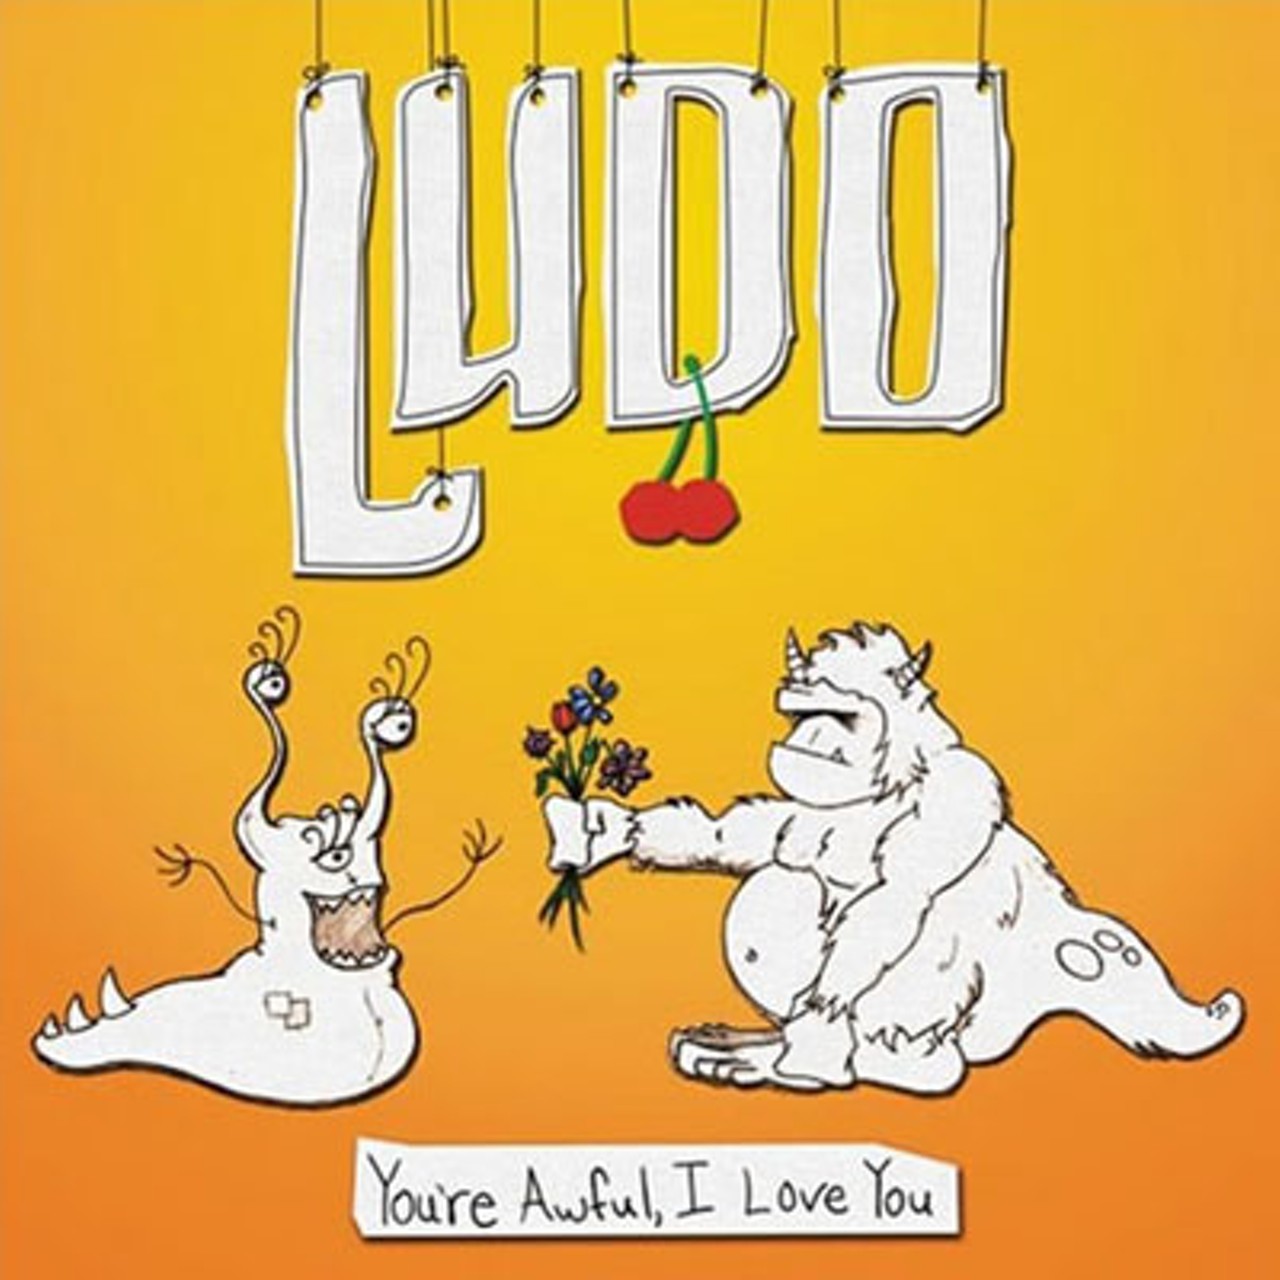 Best Local Release (on a label)
Ludo, You&rsquo;re Awful, 
I Love You (Island)
With the release of You&rsquo;re Awful, I Love You, count Ludo among those who dodged the cut-out-bin bullet. &mdash; Annie Zaleski